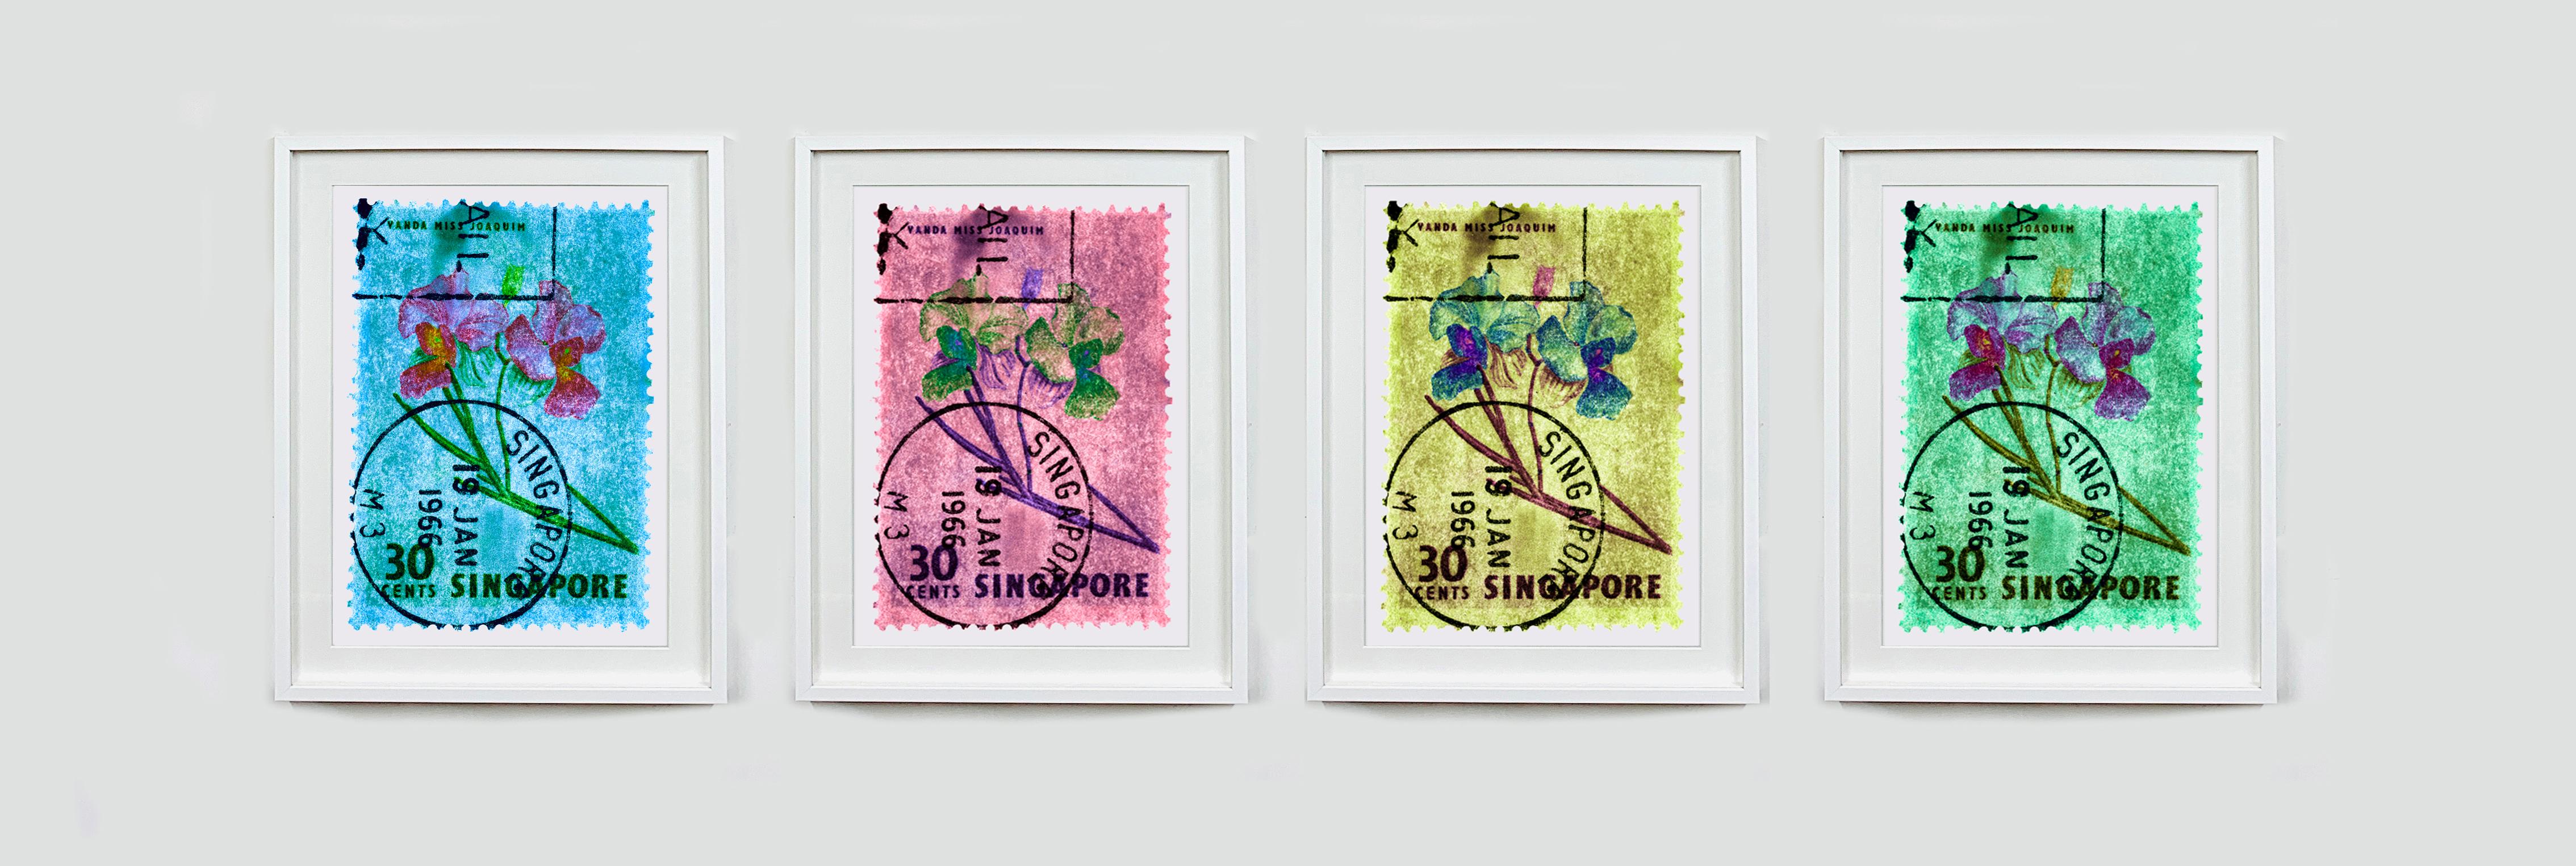 Singapore Stamp Collection, 30c Singapore Four - Floral color photo - Print by Heidler & Heeps